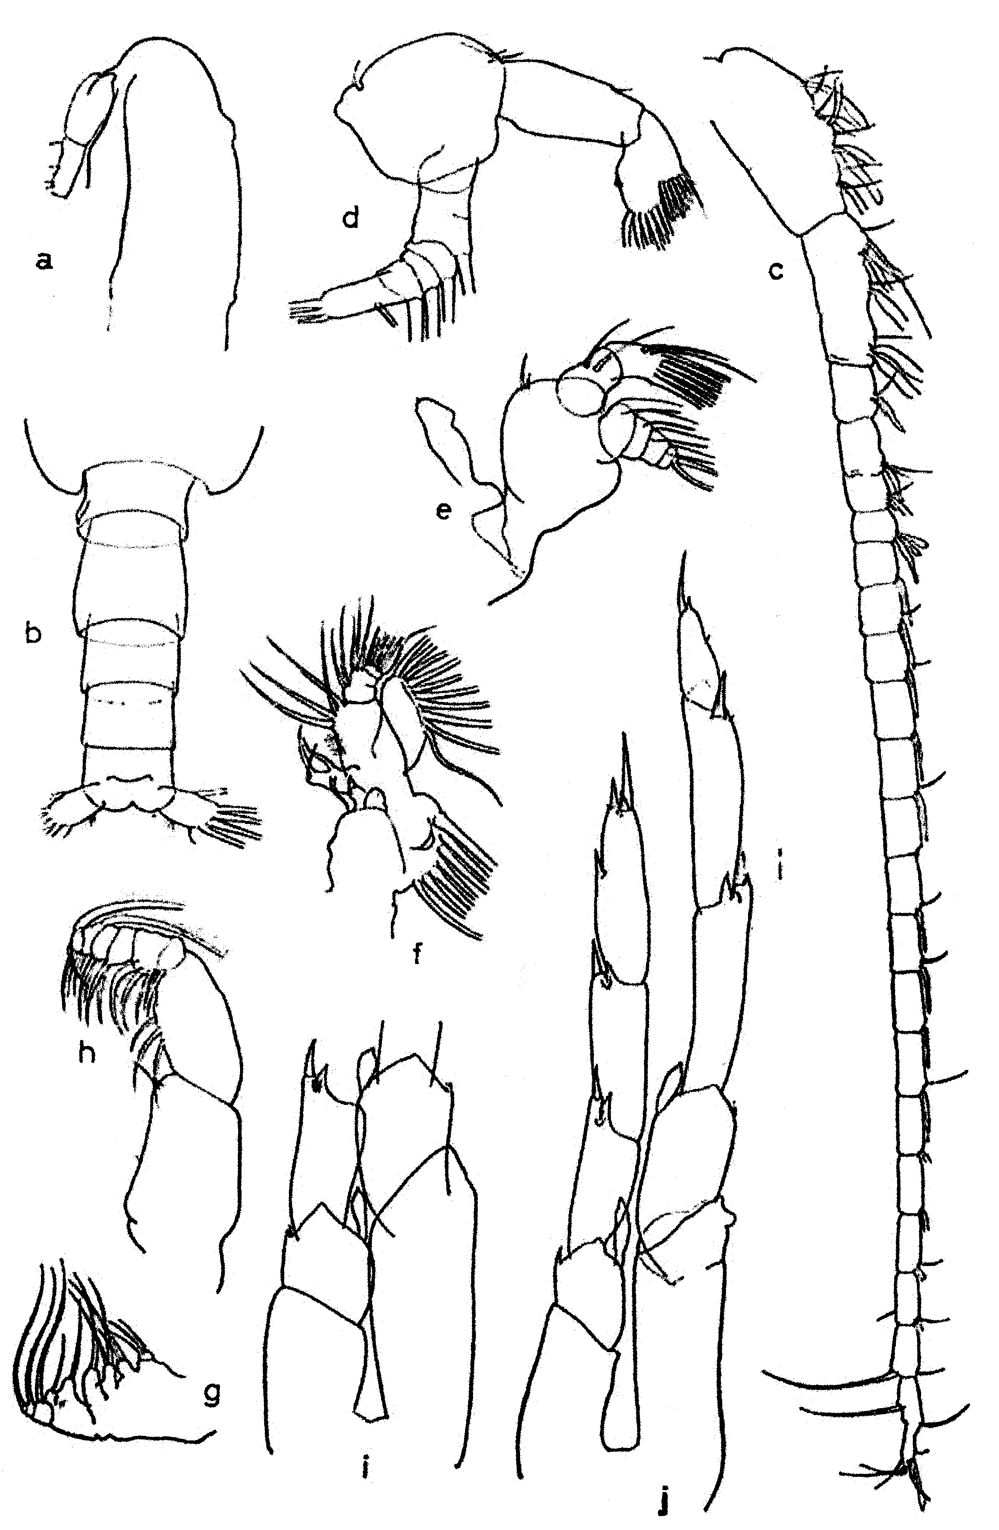 Species Calanoides philippinensis - Plate 2 of morphological figures